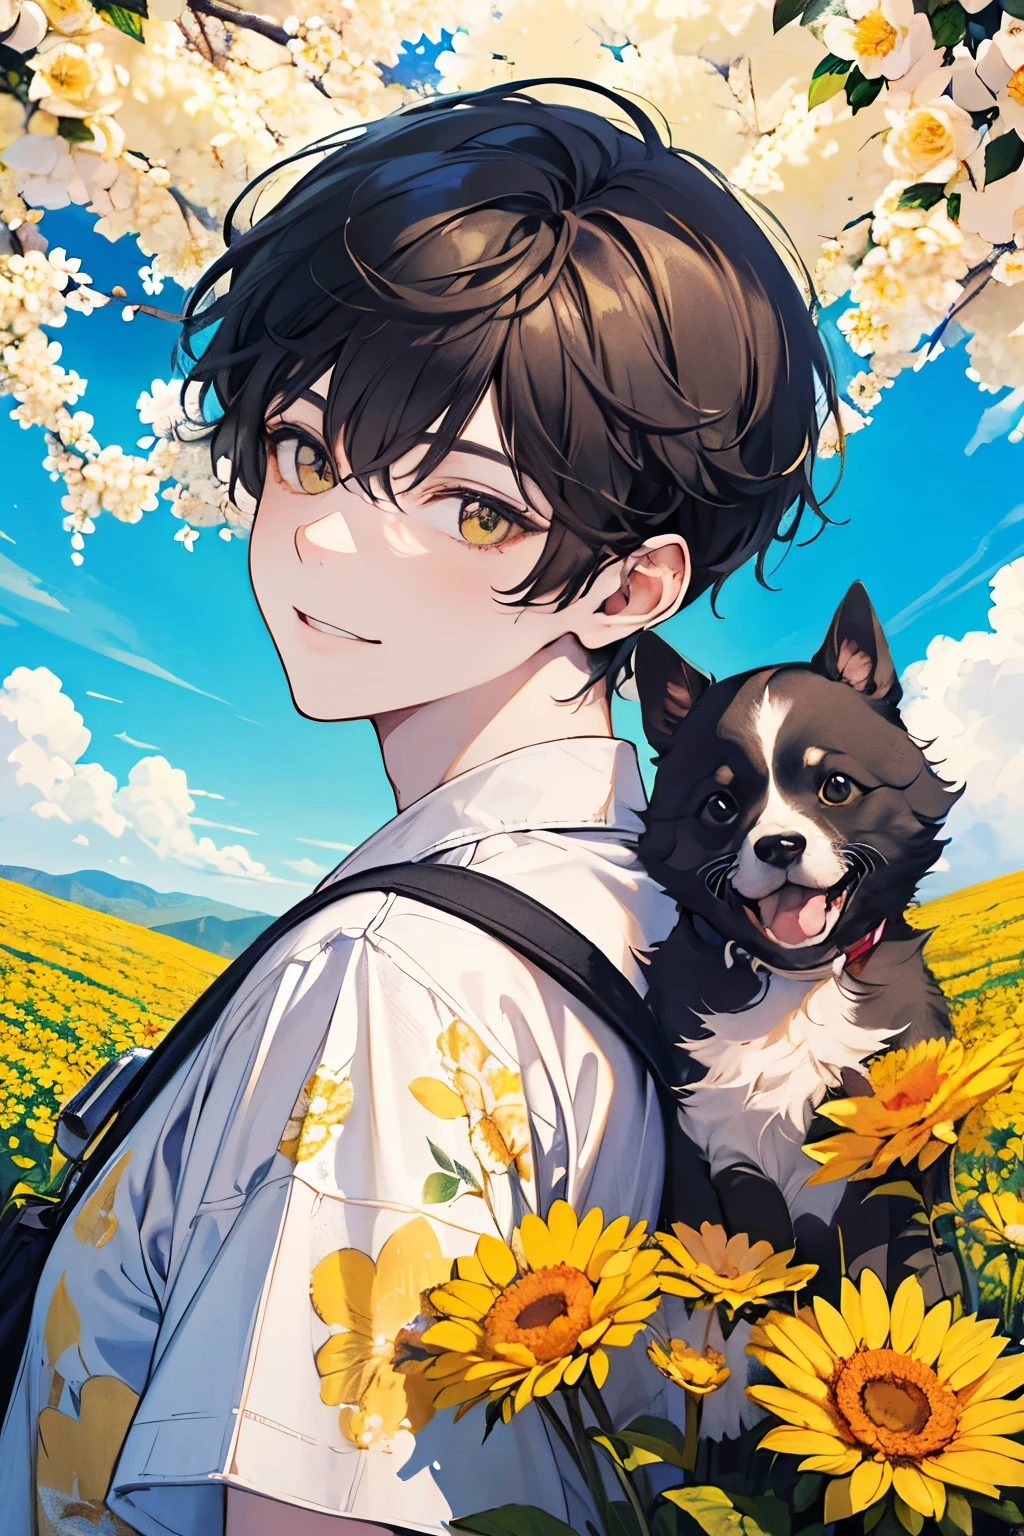 ((young men's:1.1)),(Oversized floral T-shirt:1.35),Prompt: An incredibly charming  carrying a backpack, accompanied by her adorable puppy, enjoying a lovely spring outing surrounded by beautiful yellow flowers and natural scenery. The illustration is in high definition at 4k resolution, with highly-detailed facial features and cartoon-style visuals,smile,(Gazing at each other:1.1).